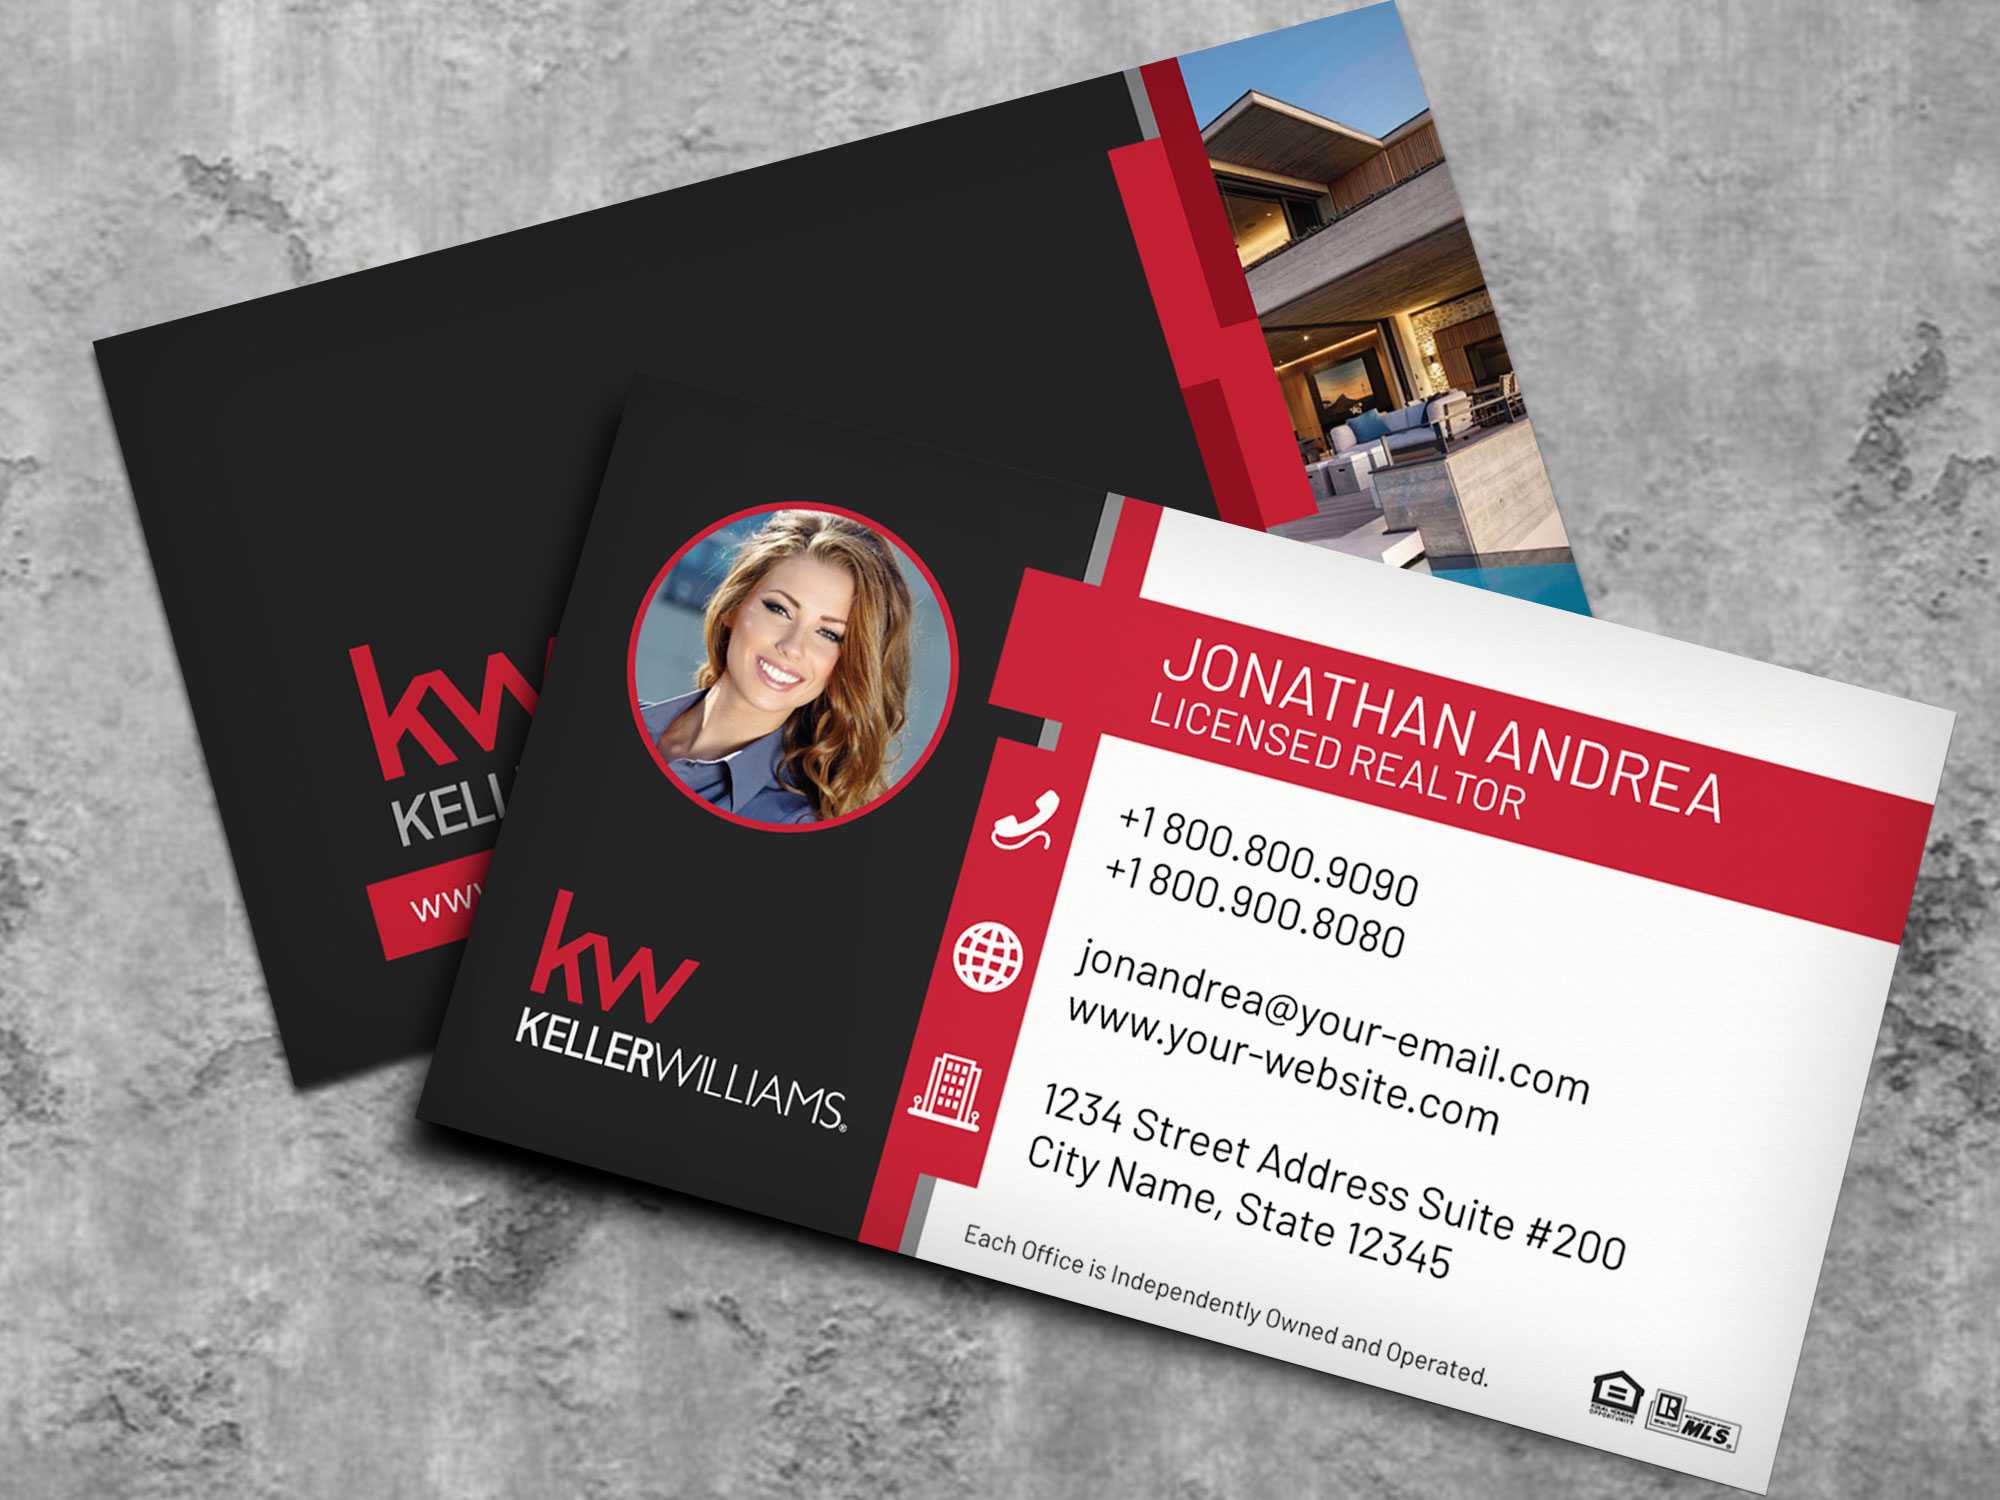 Keller Williams Business Card Template Bc19702Kw - Nusacreative Throughout Keller Williams Business Card Templates